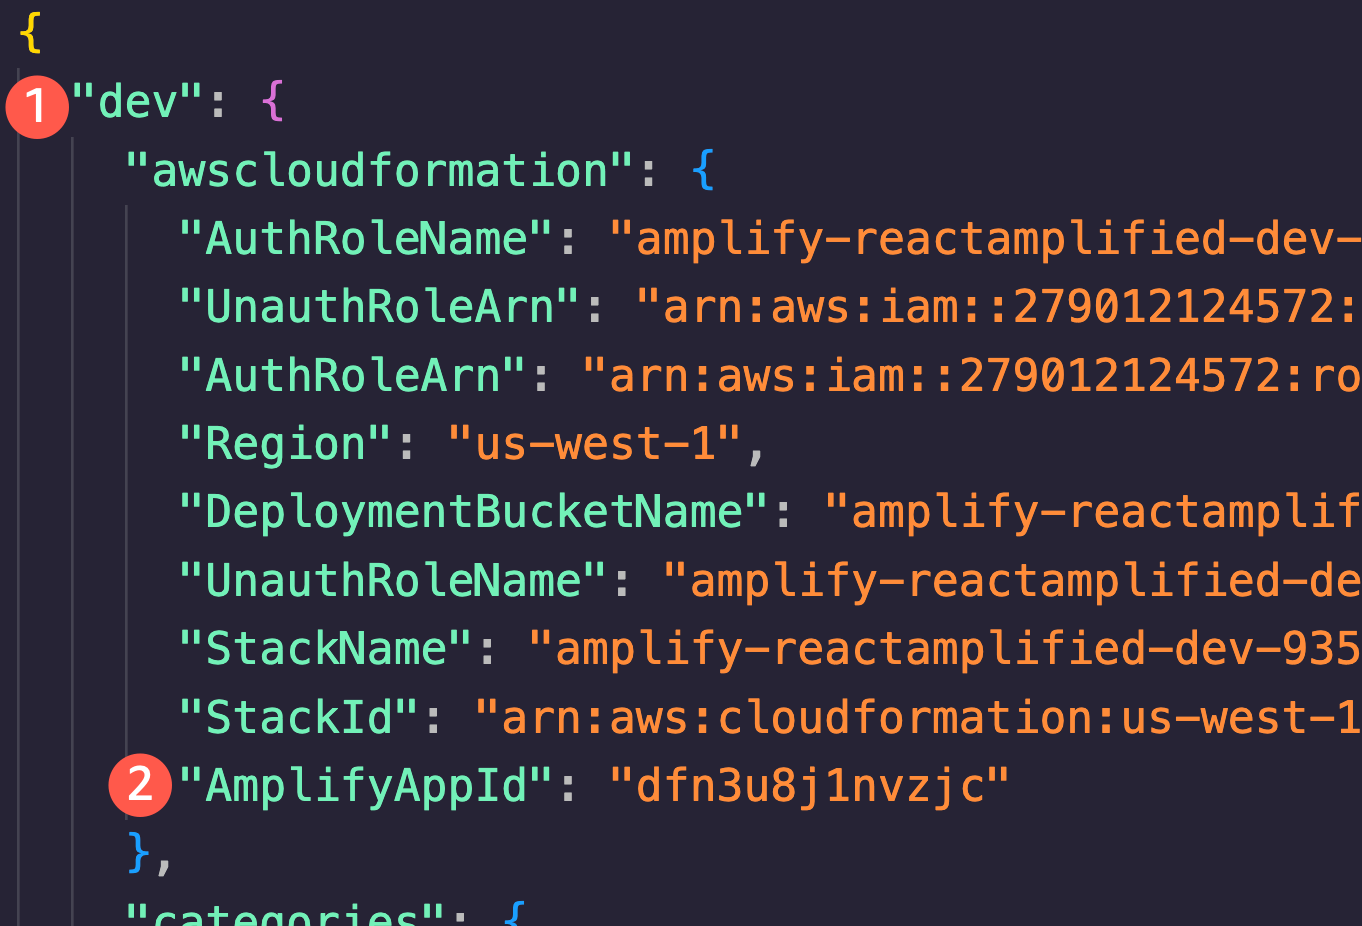 The environment and AmplifyAppId in team-provider-info.json file.